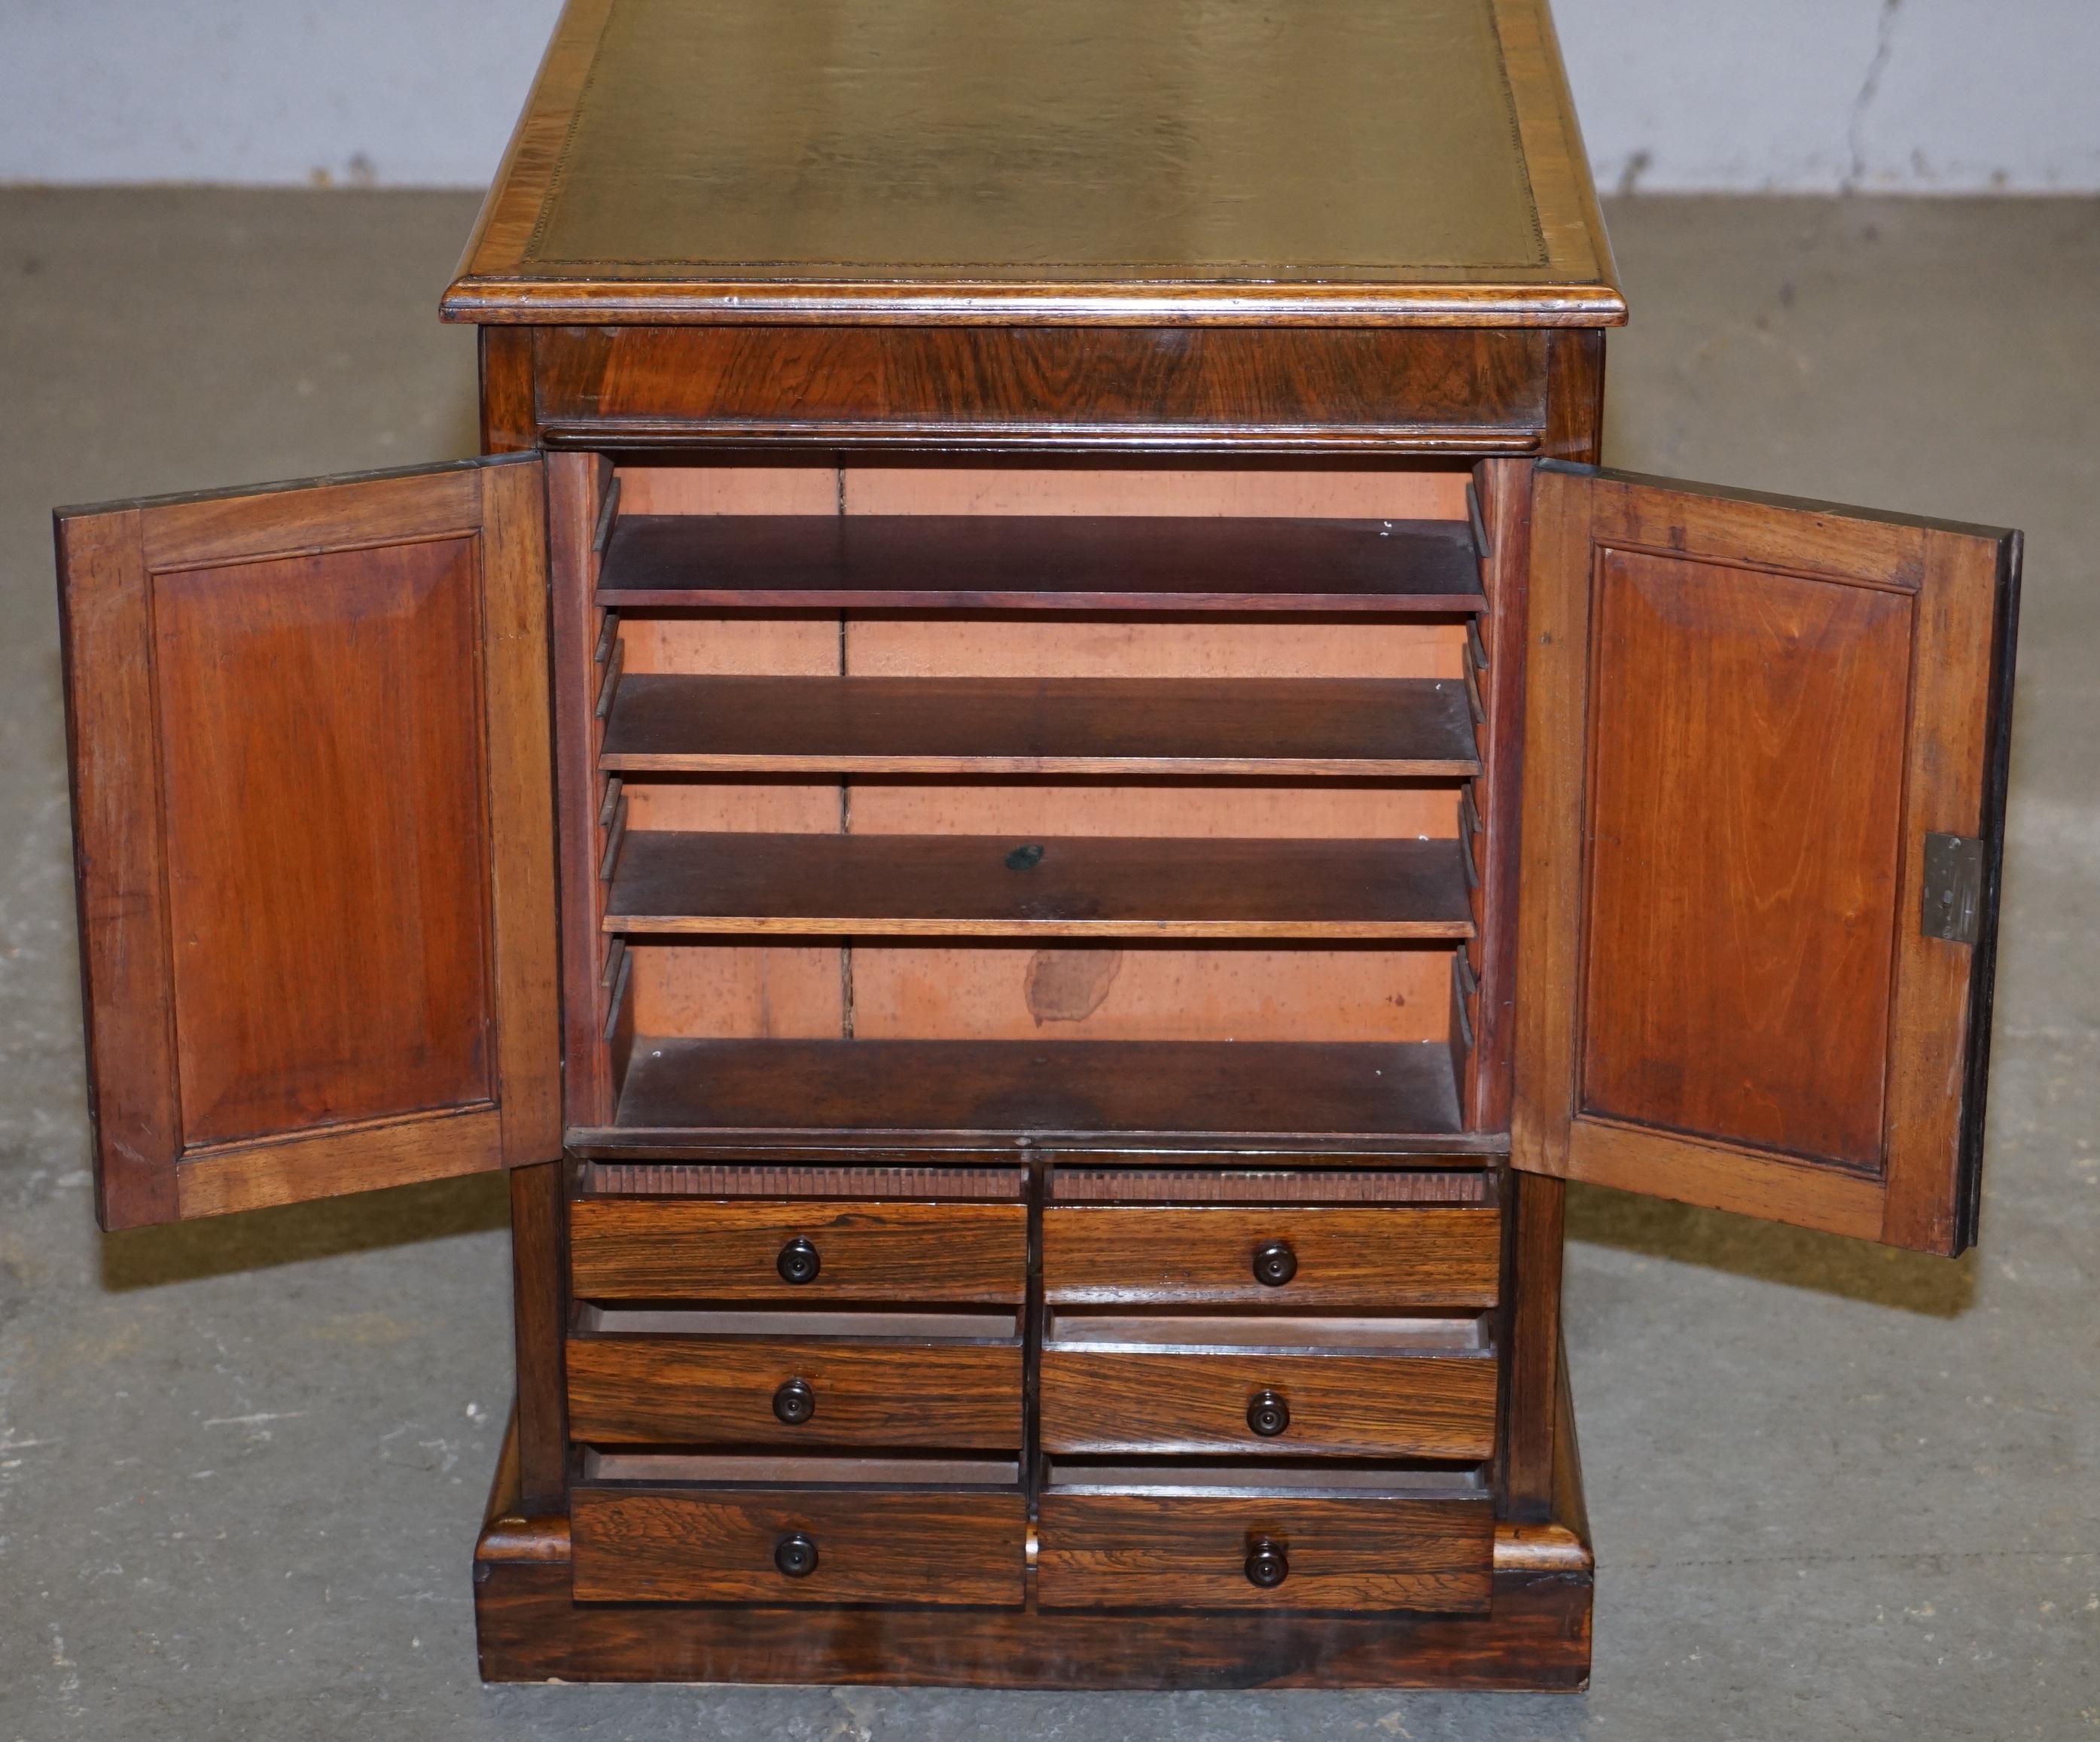 RARE WILLIAM IV CIRCA 1830 HARDWOOD LIBRARY FOLIO CABiNET WITH DRAWERS BOOKCASE For Sale 13